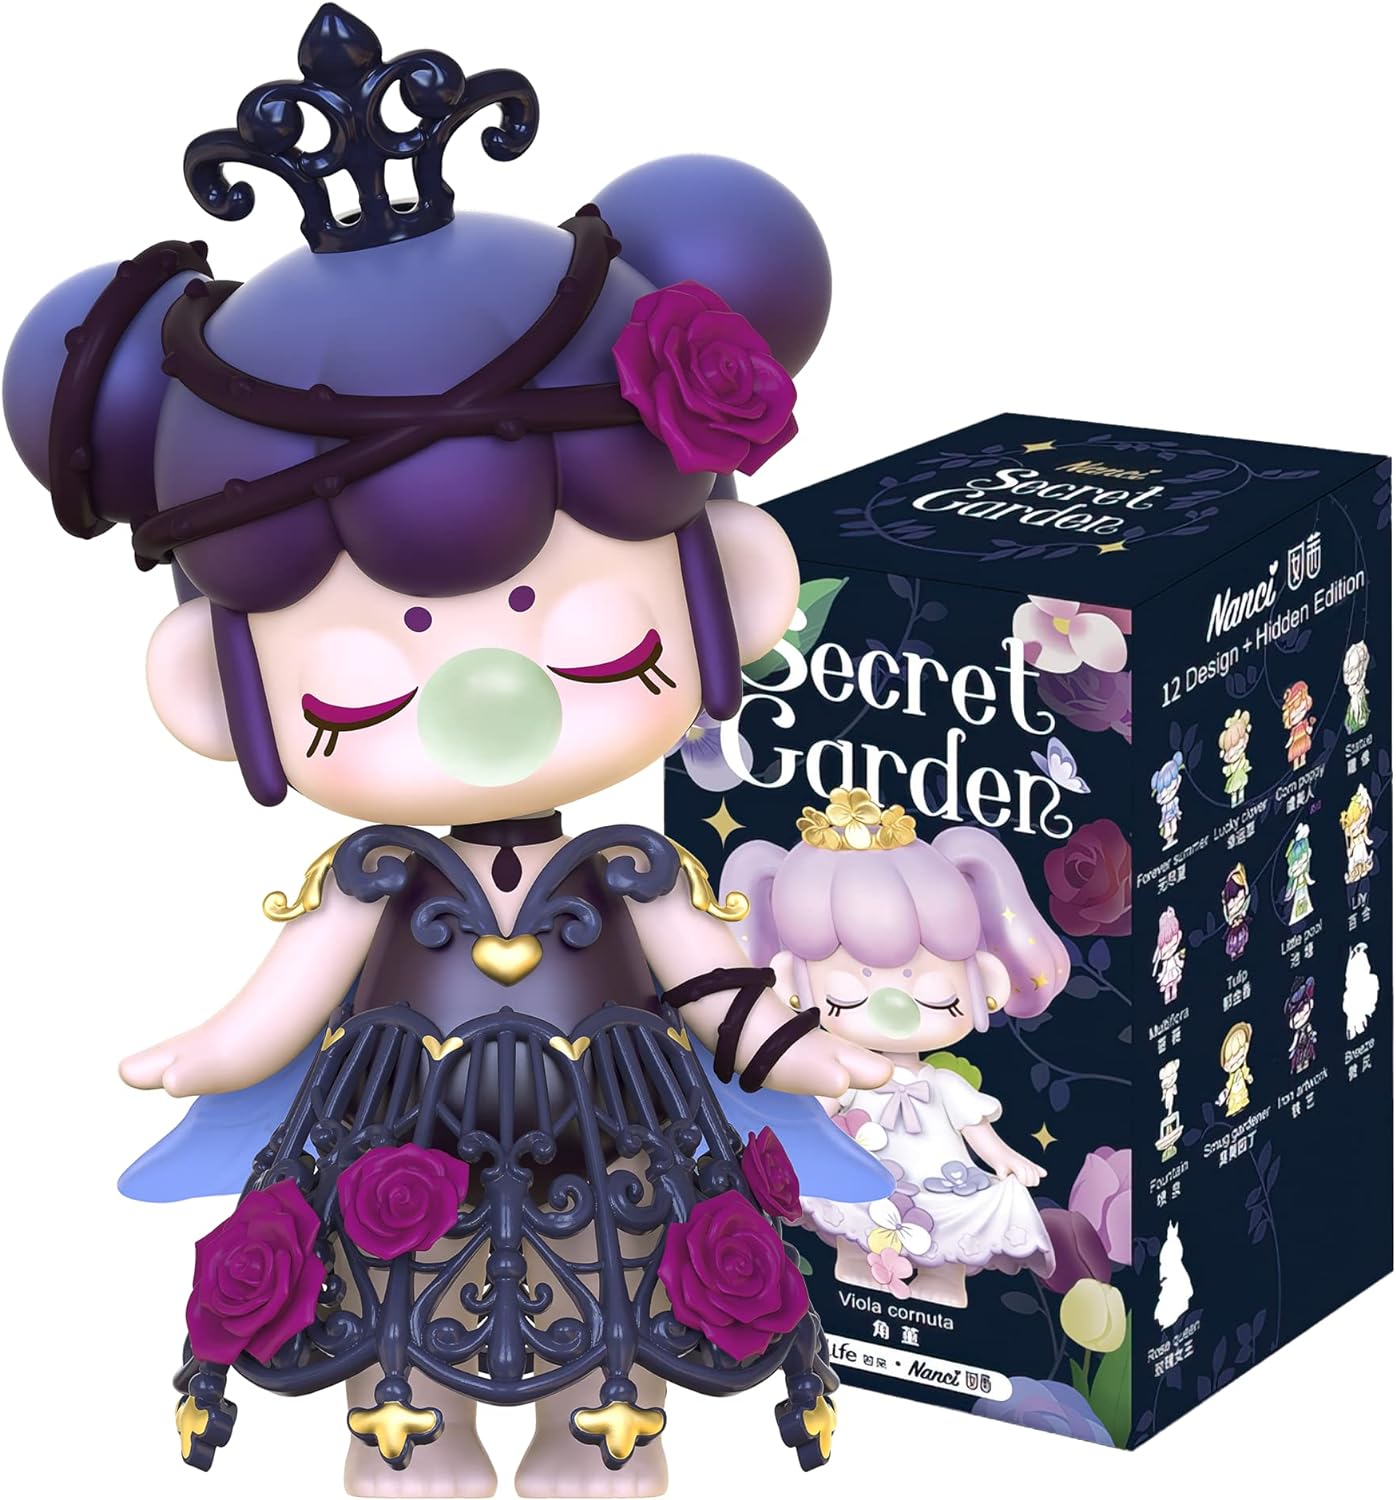 Rolife Nanci Blind Box-Secret Garden Series, 1PC Exclusive Action Figure Box, Popular Collectible Toy Cute Action Figure Creative Kits for Birthday Gifts/Christmas Holiday